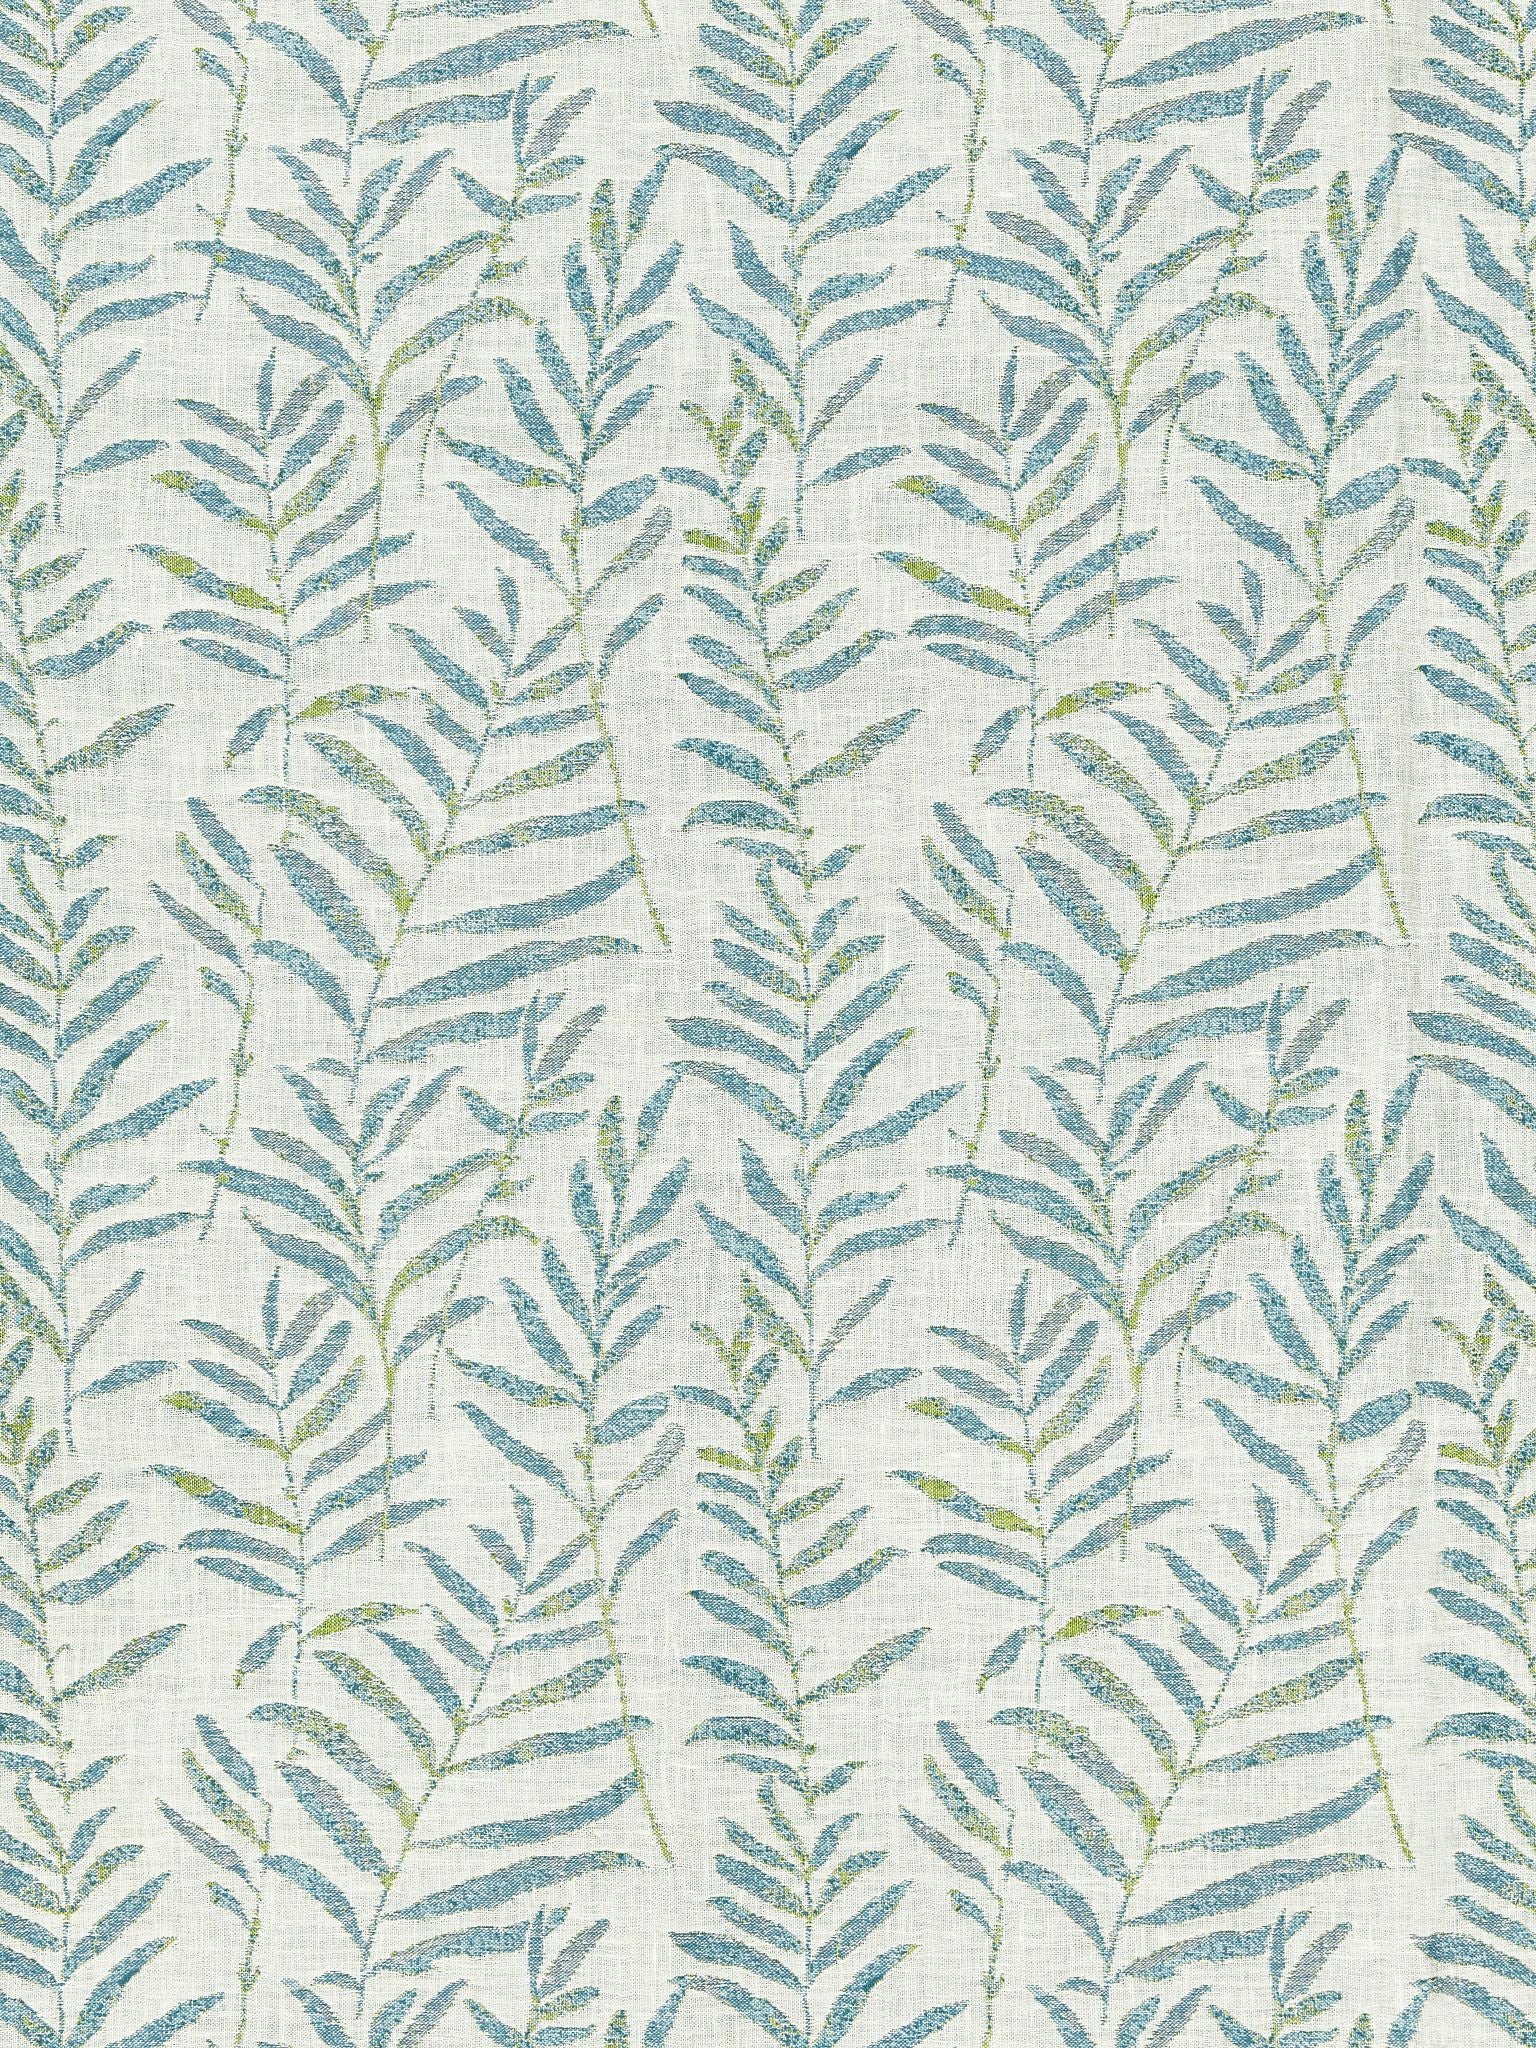 Willow Weave fabric in seagrass color - pattern number GW 000327211 - by Scalamandre in the Grey Watkins collection